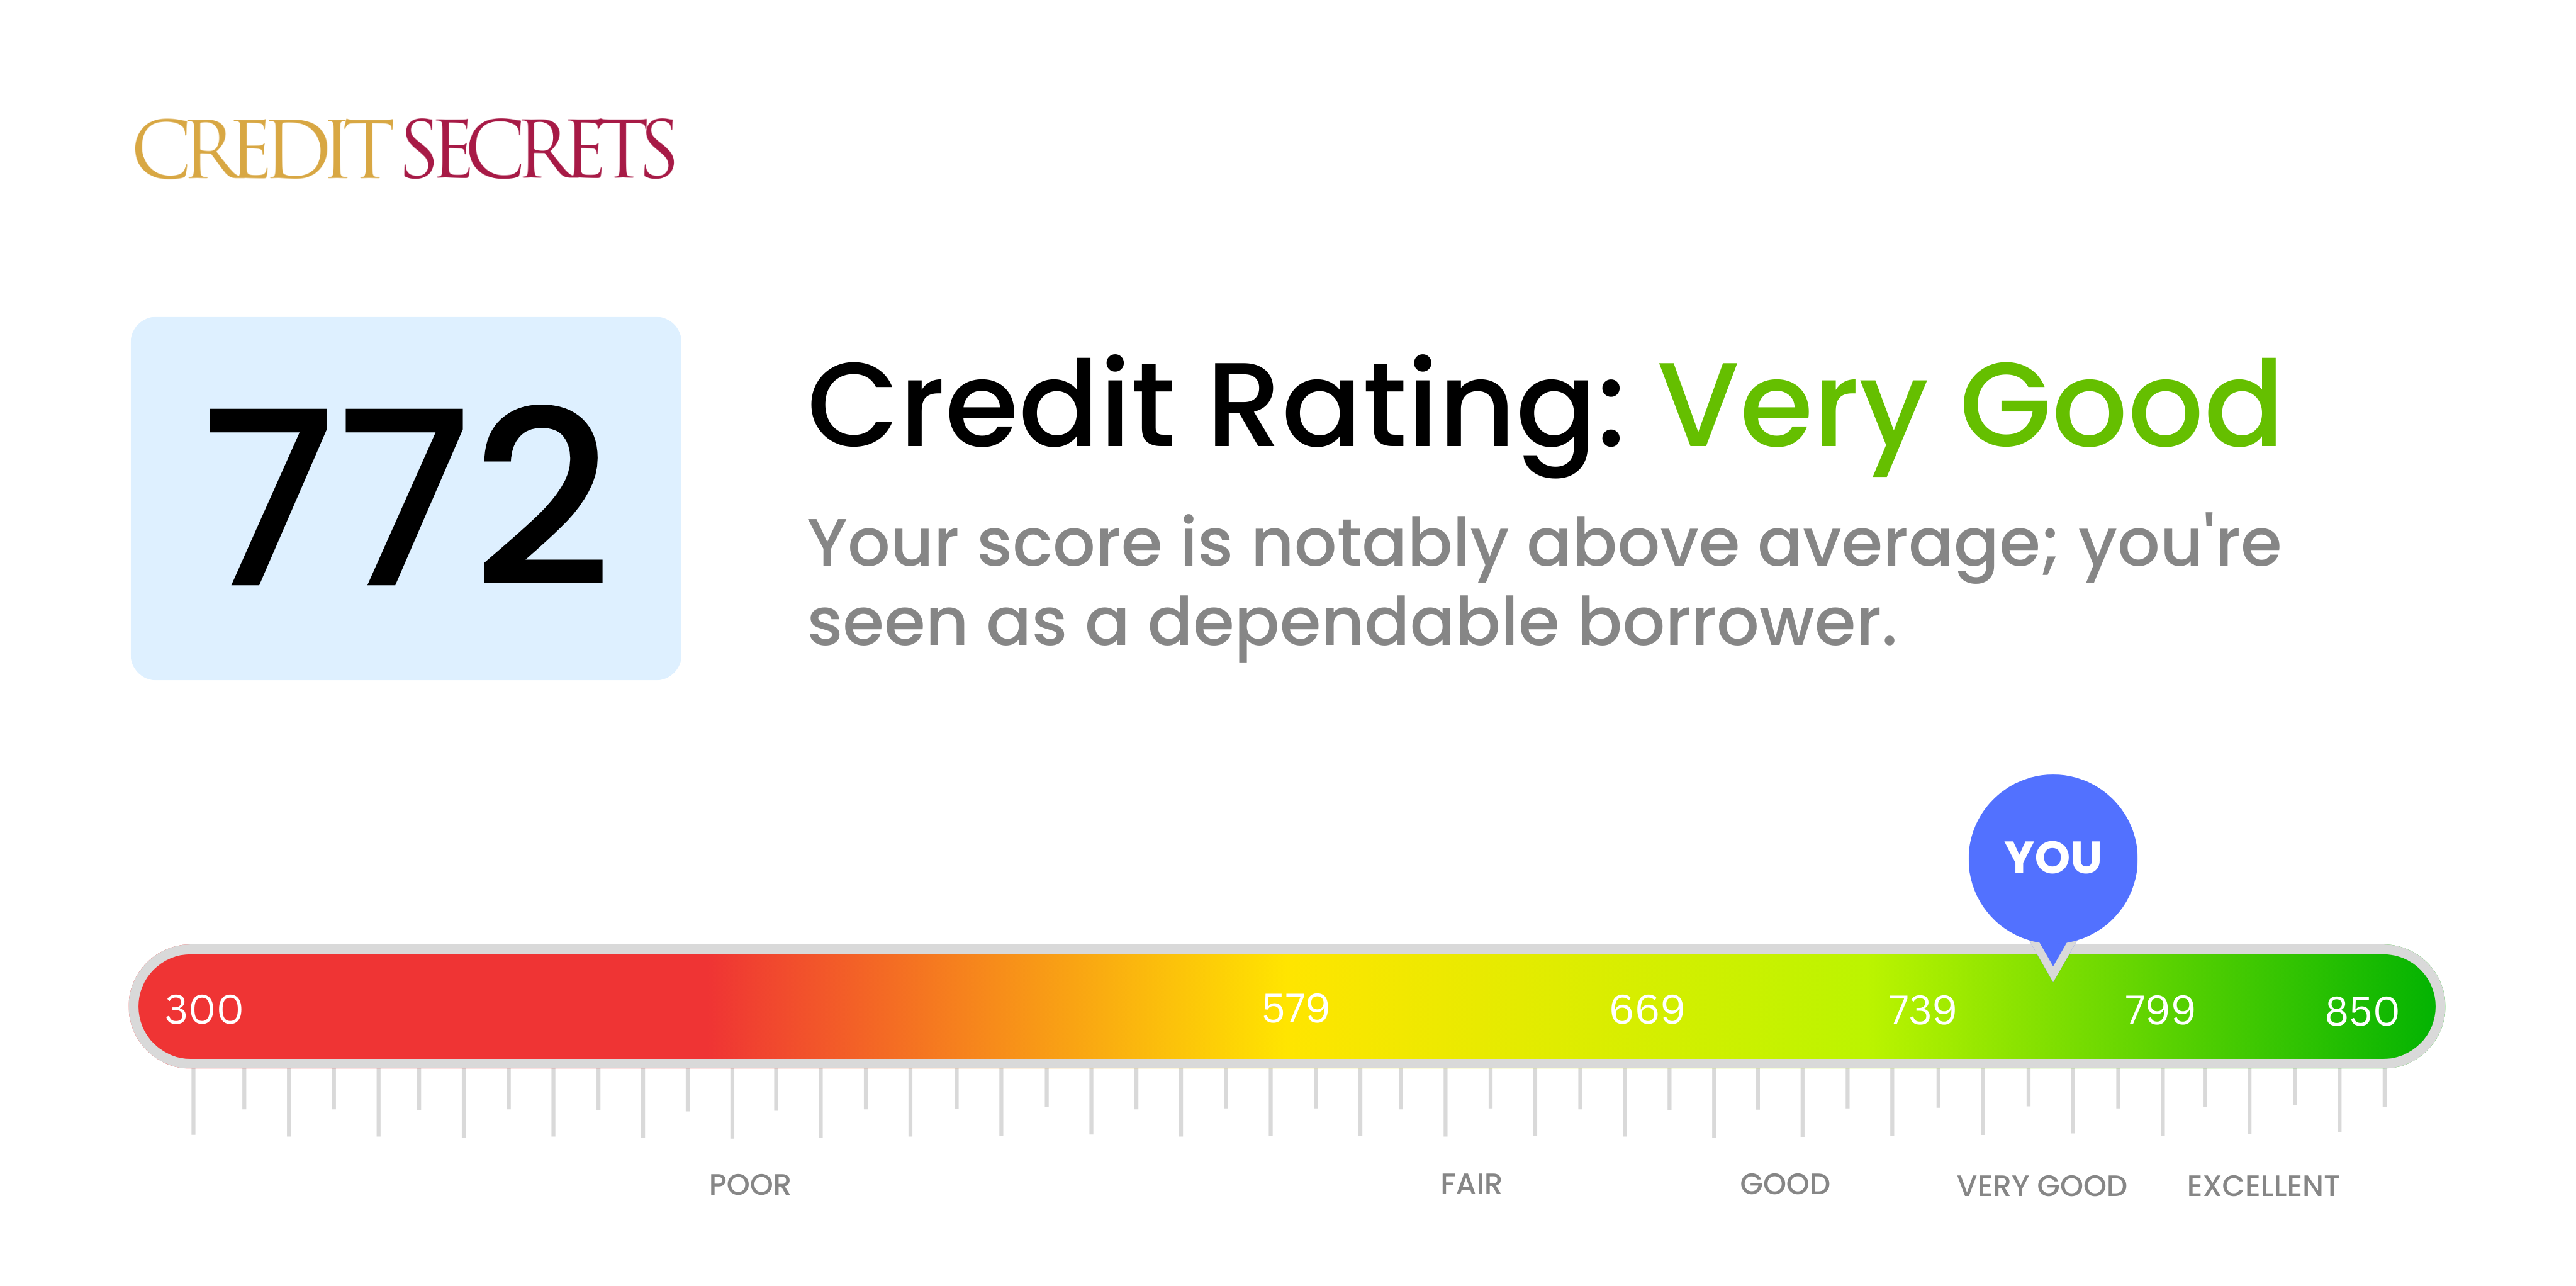 Is 772 a good credit score?